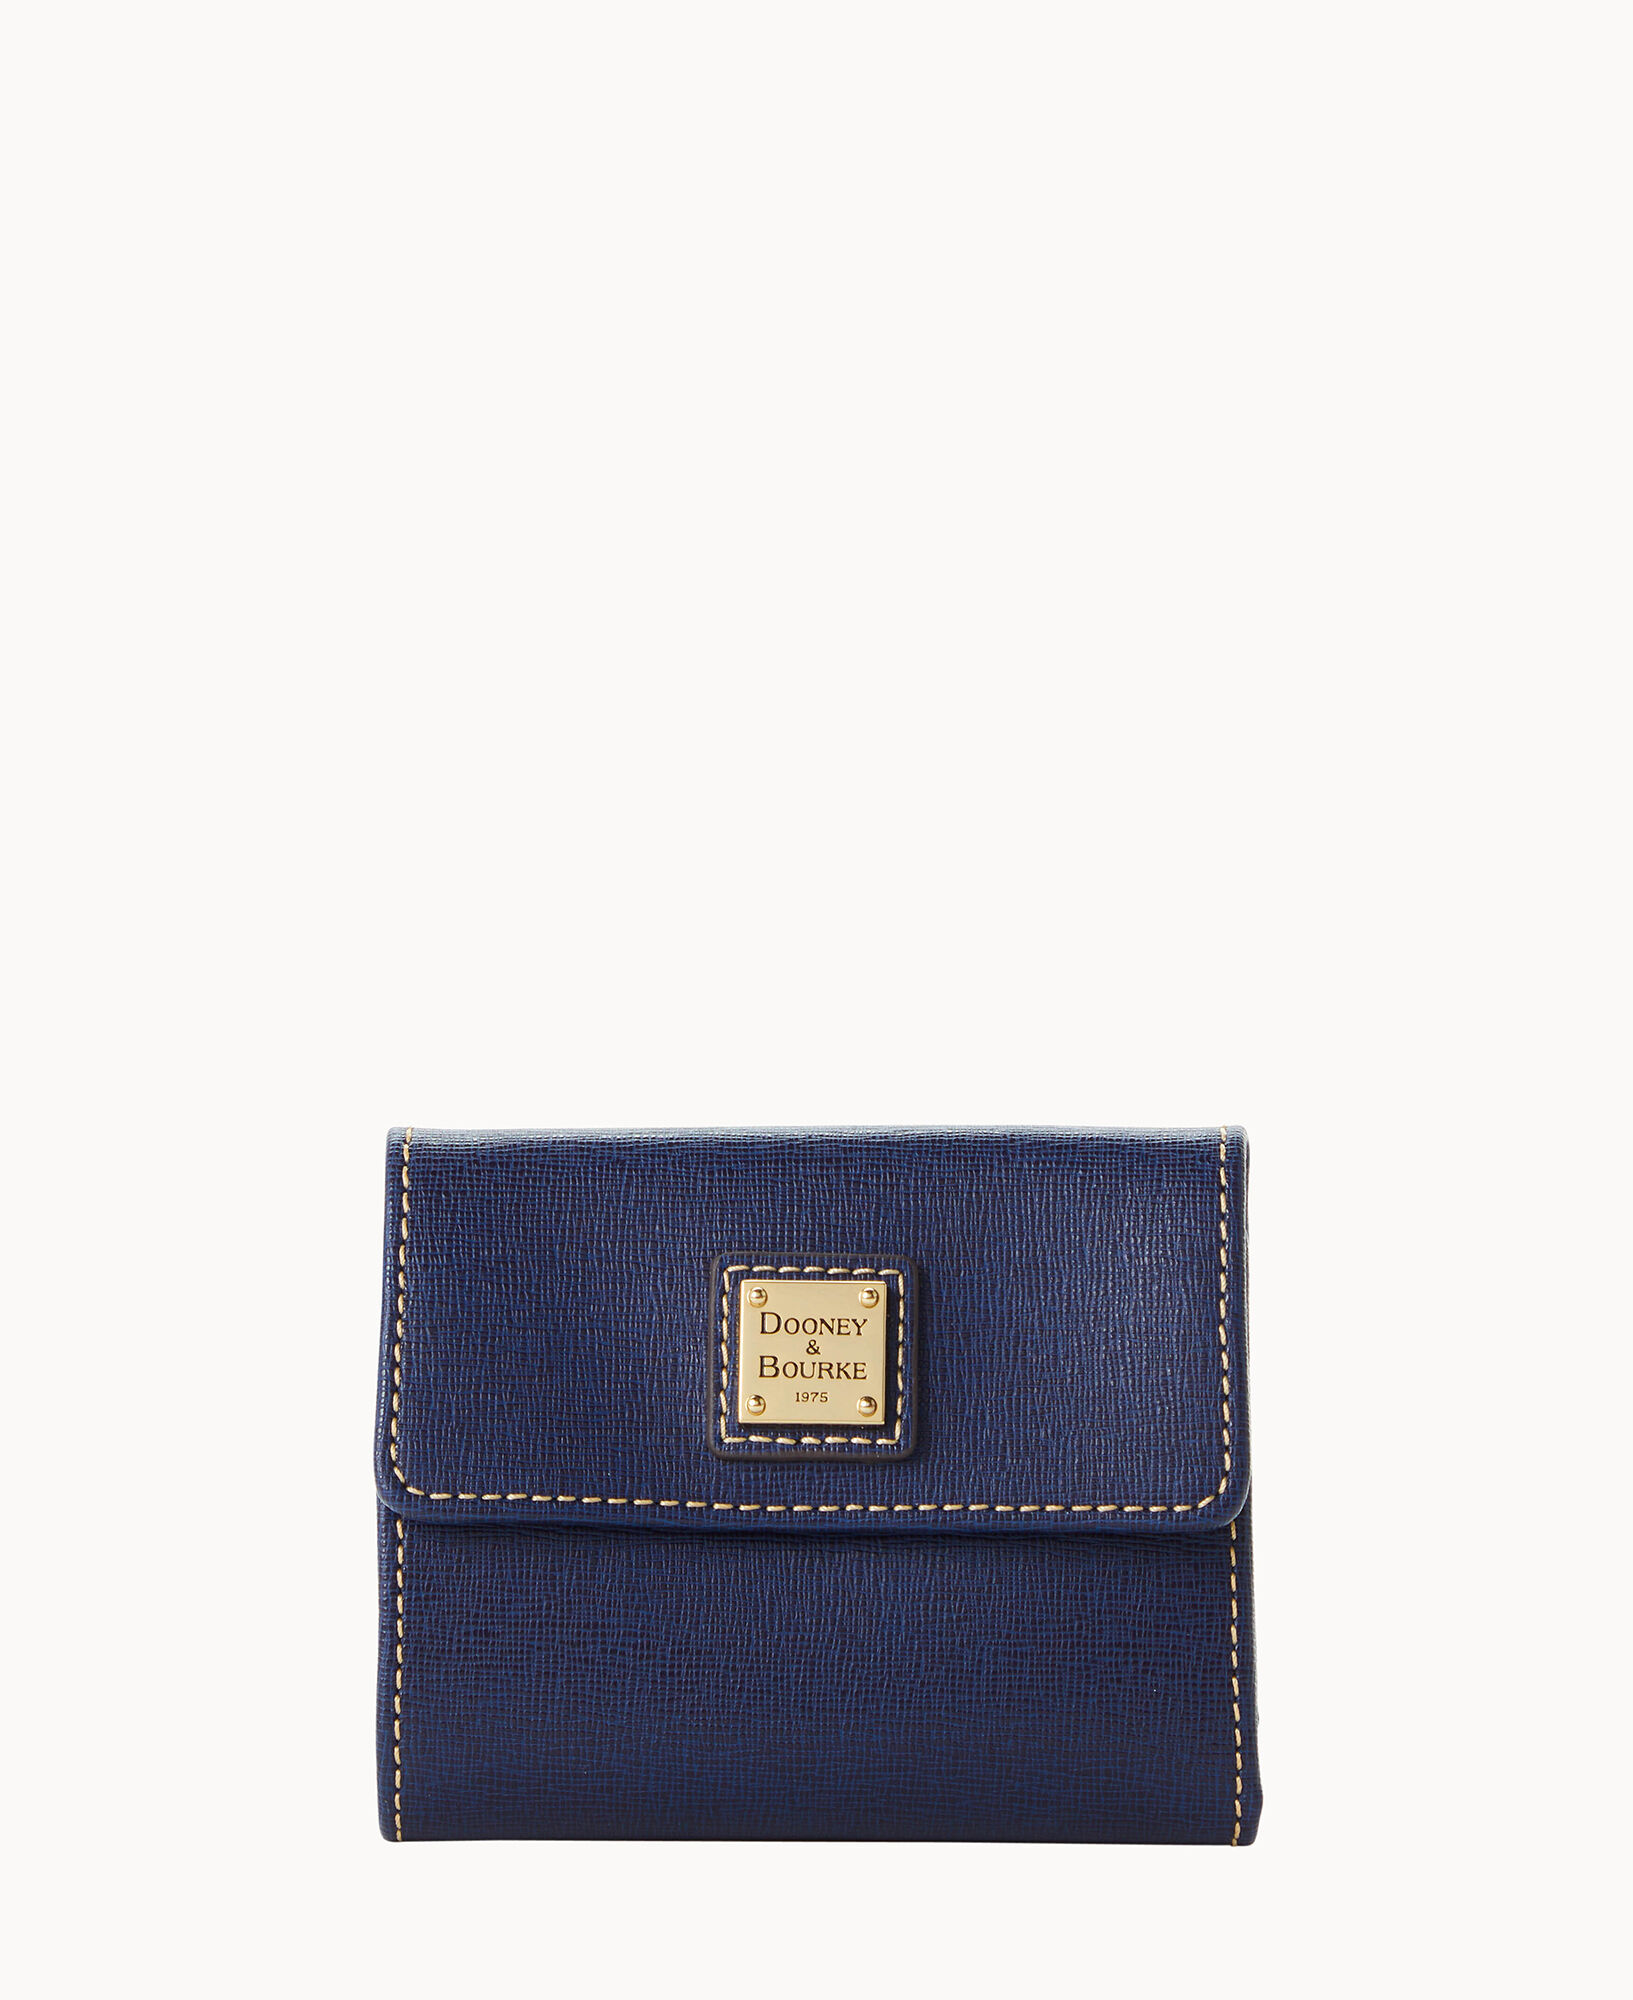  Dooney & Bourke Wallet, Saffiano Small Flap Credit Card Wallet  - Amber : Clothing, Shoes & Jewelry